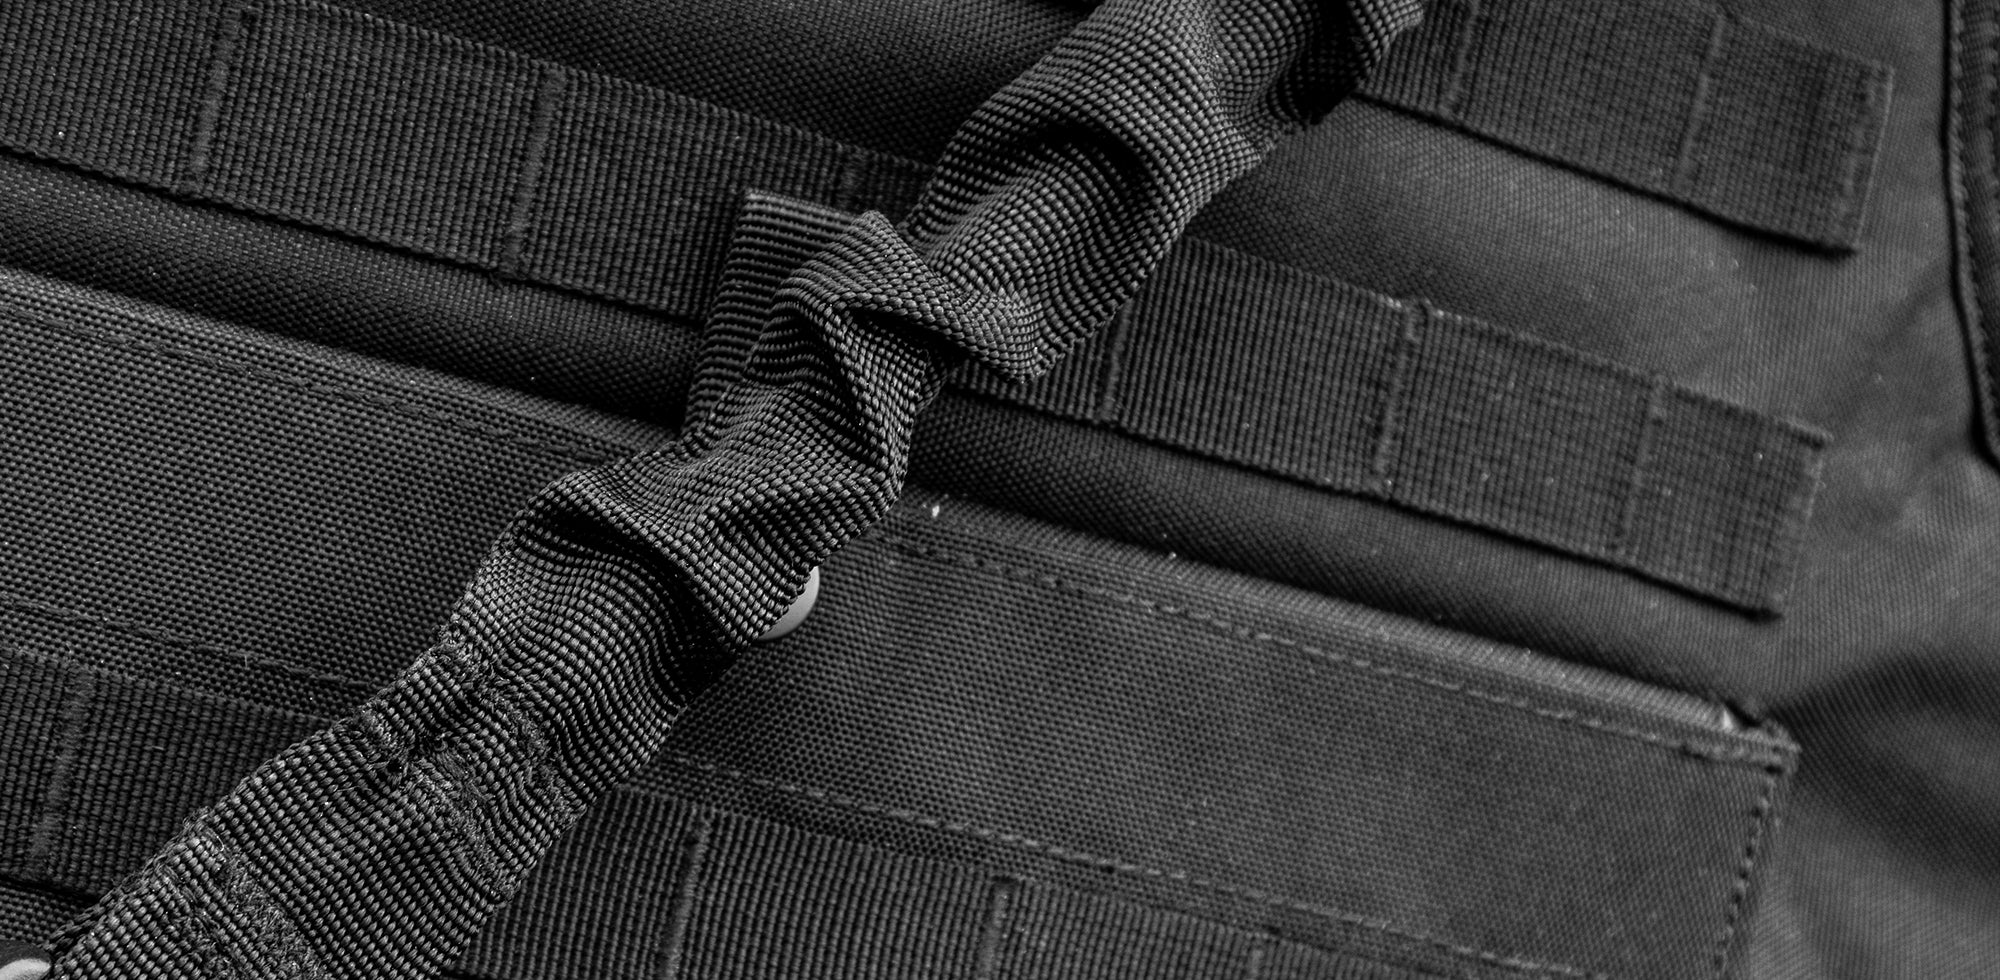 Two Point Sling in black - Shop all Tactical Slings